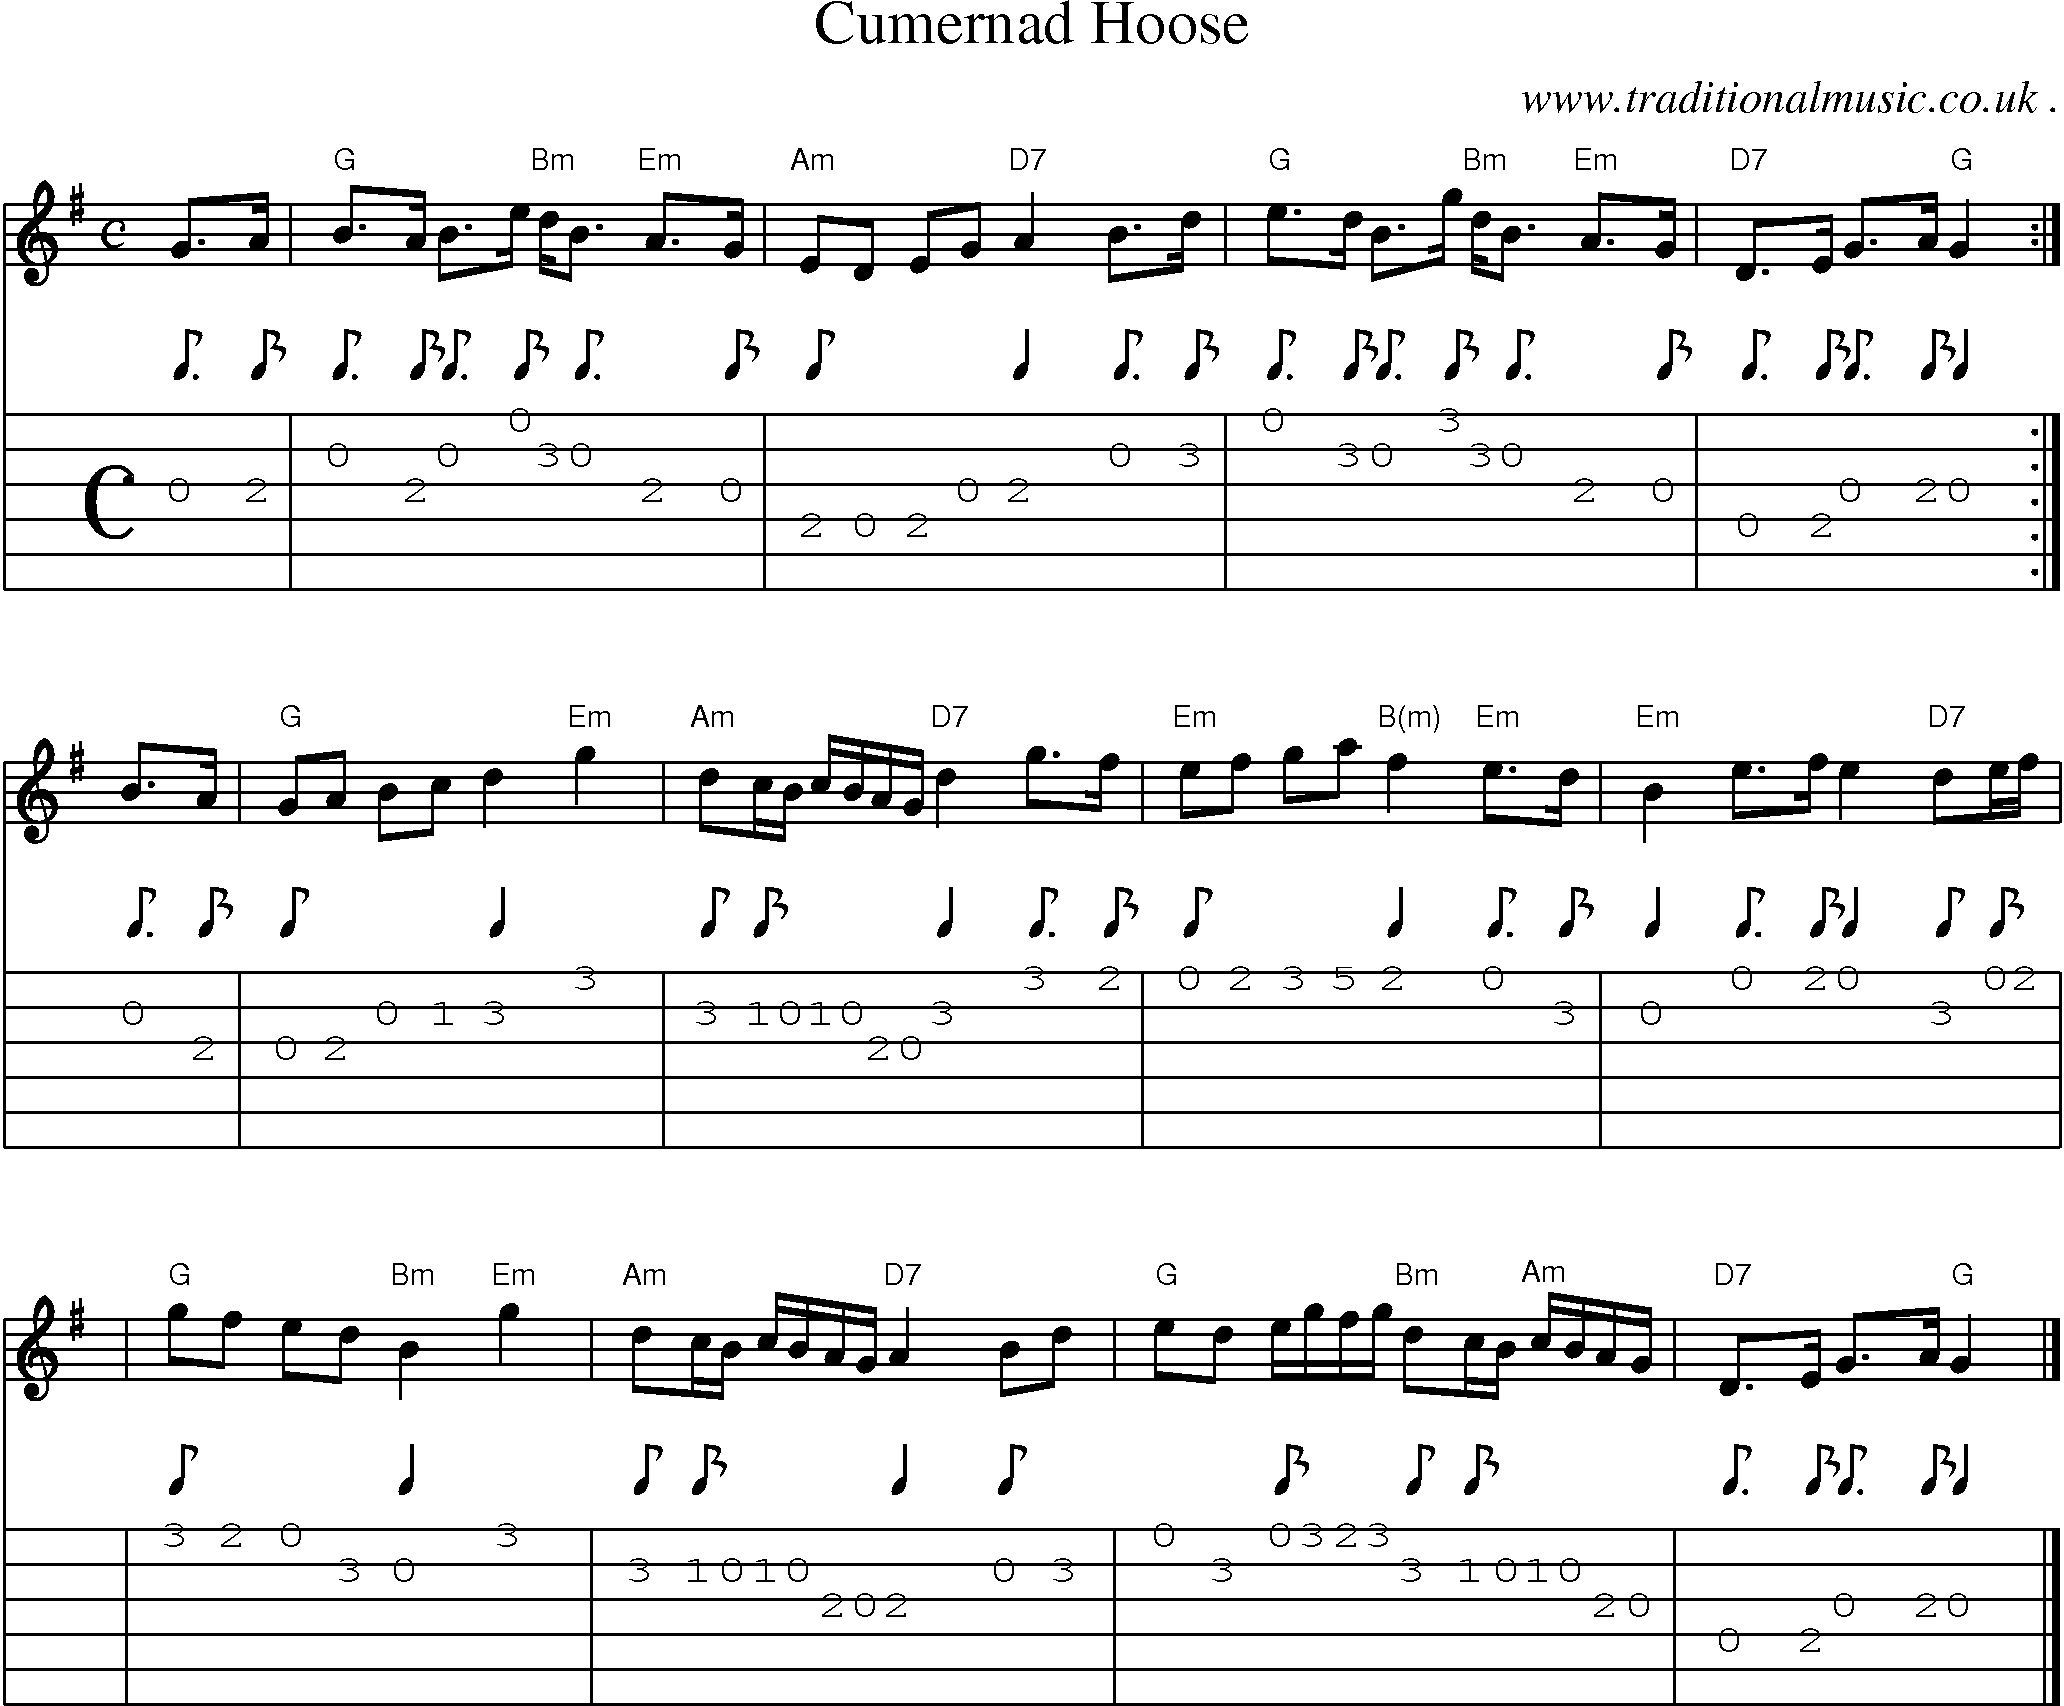 Sheet-music  score, Chords and Guitar Tabs for Cumernad Hoose